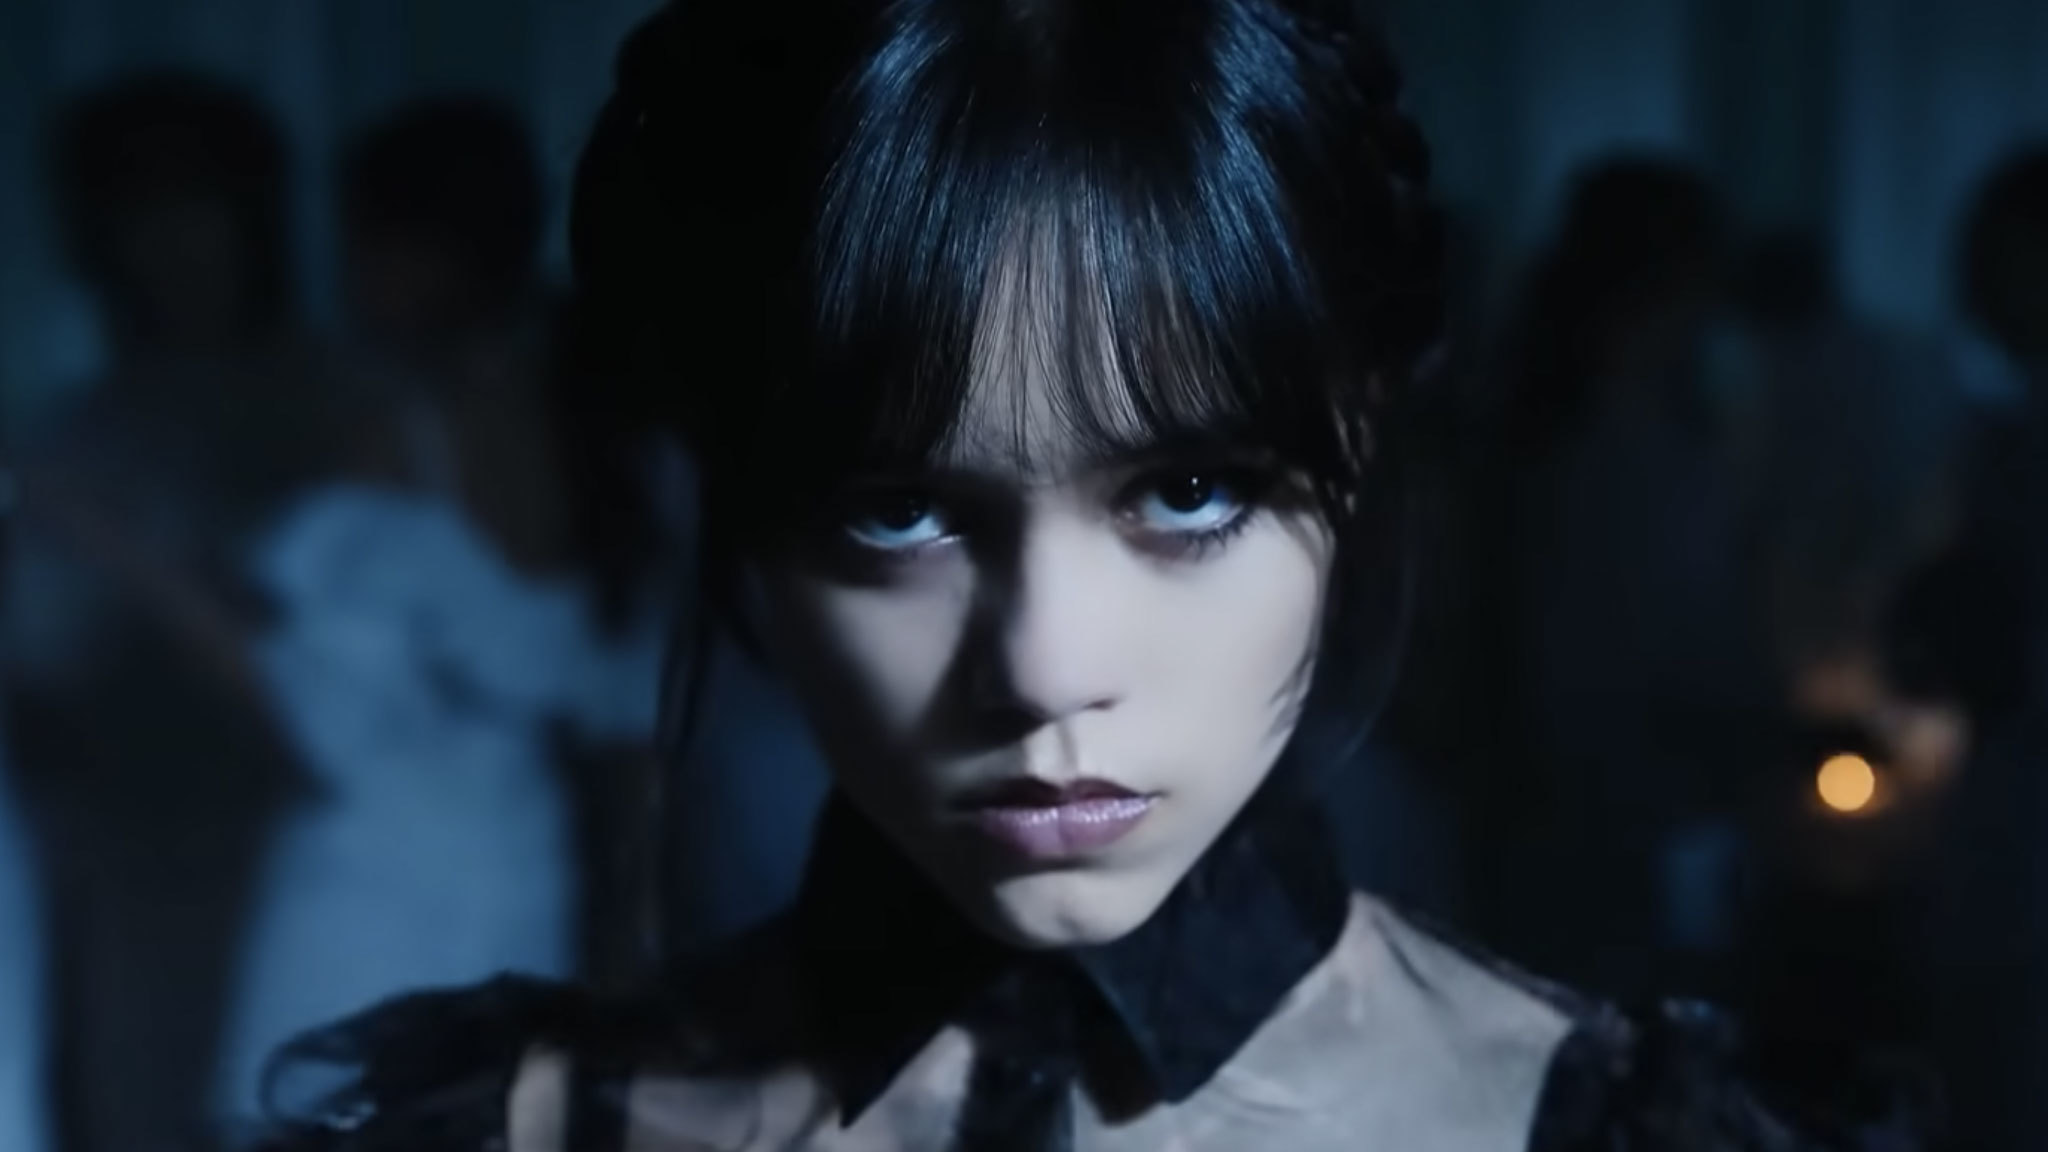 Watch: Jenna Ortega Gets Into Character in Netflix's 'Wednesday' Featurette